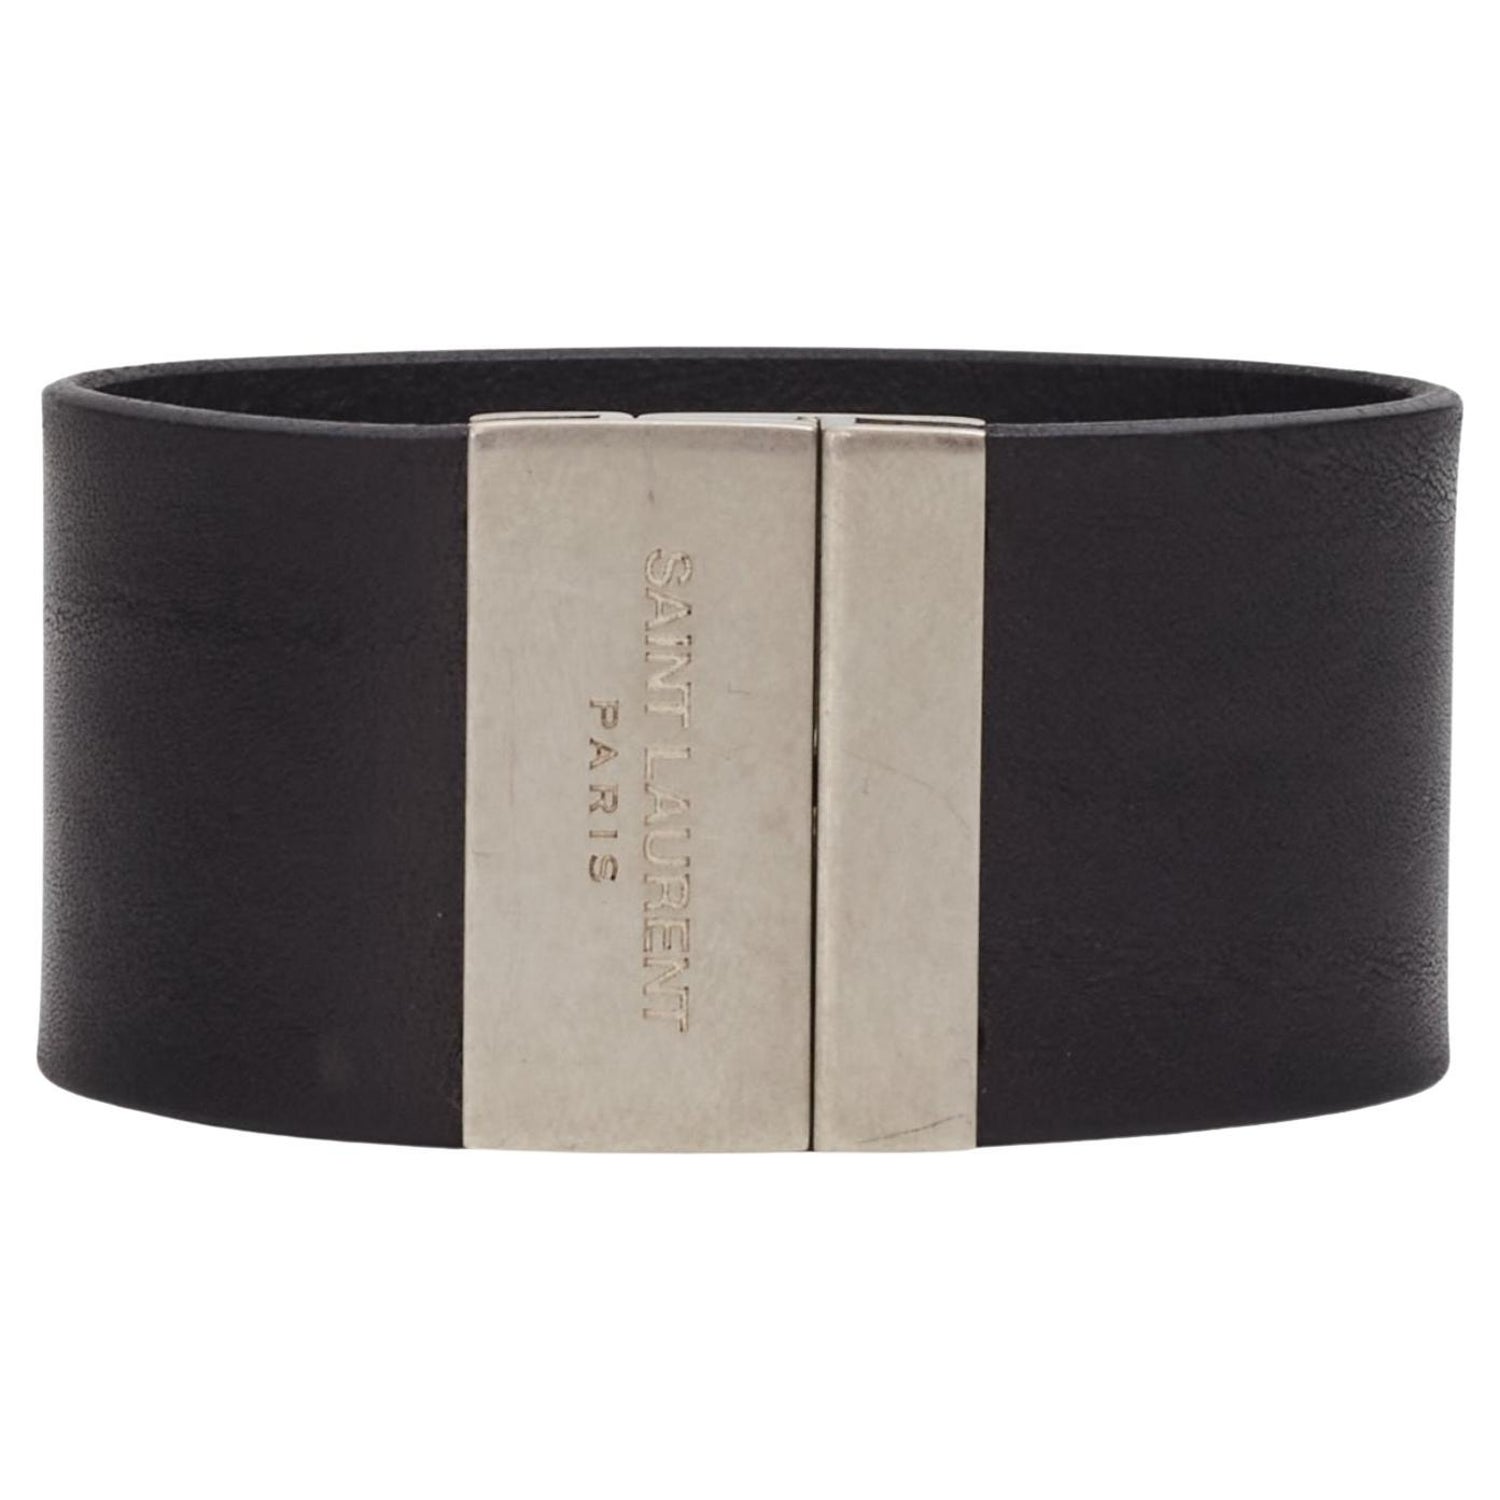 Louis Vuitton 90cm Black Patent Leather Belt with Key and Lock Charm  (CA1027) - The Attic Place